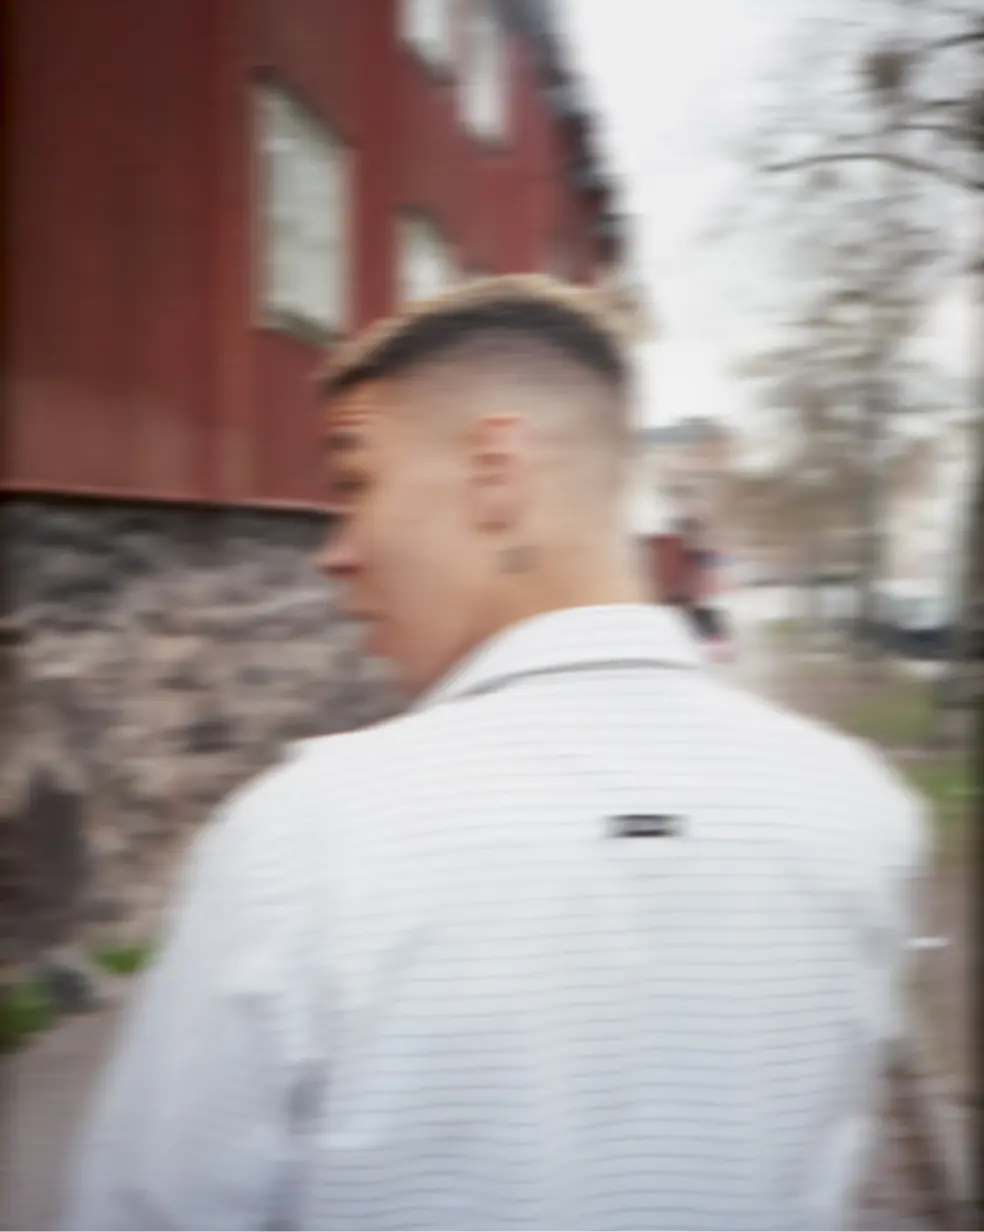 A blurred image of a person walking with their back to the camera, wearing white clothing. The person's head is tilted back.